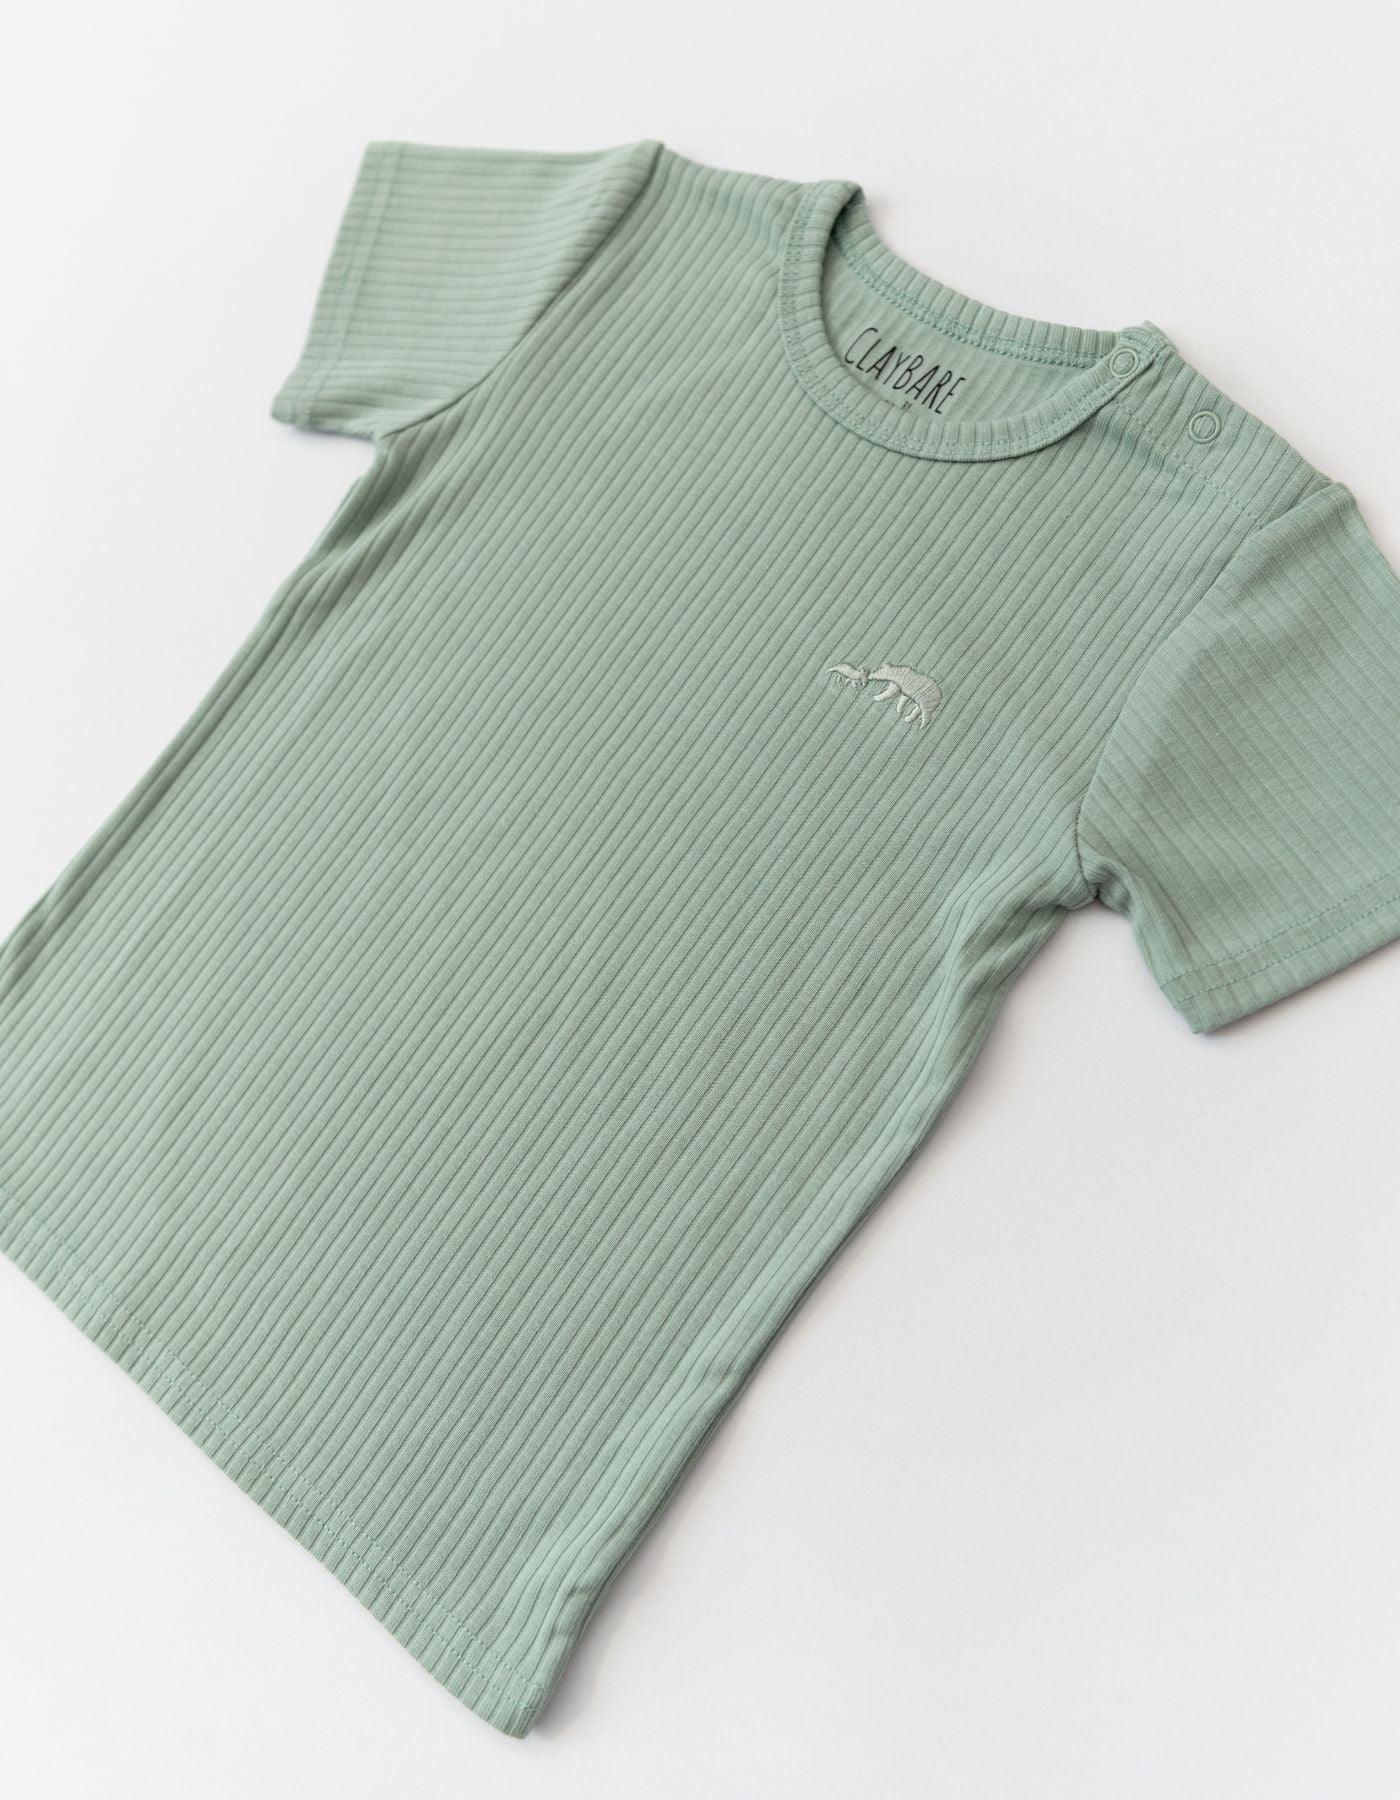 files/mint-ribbed-short-sleeve-top-claybearofficial-5.jpg